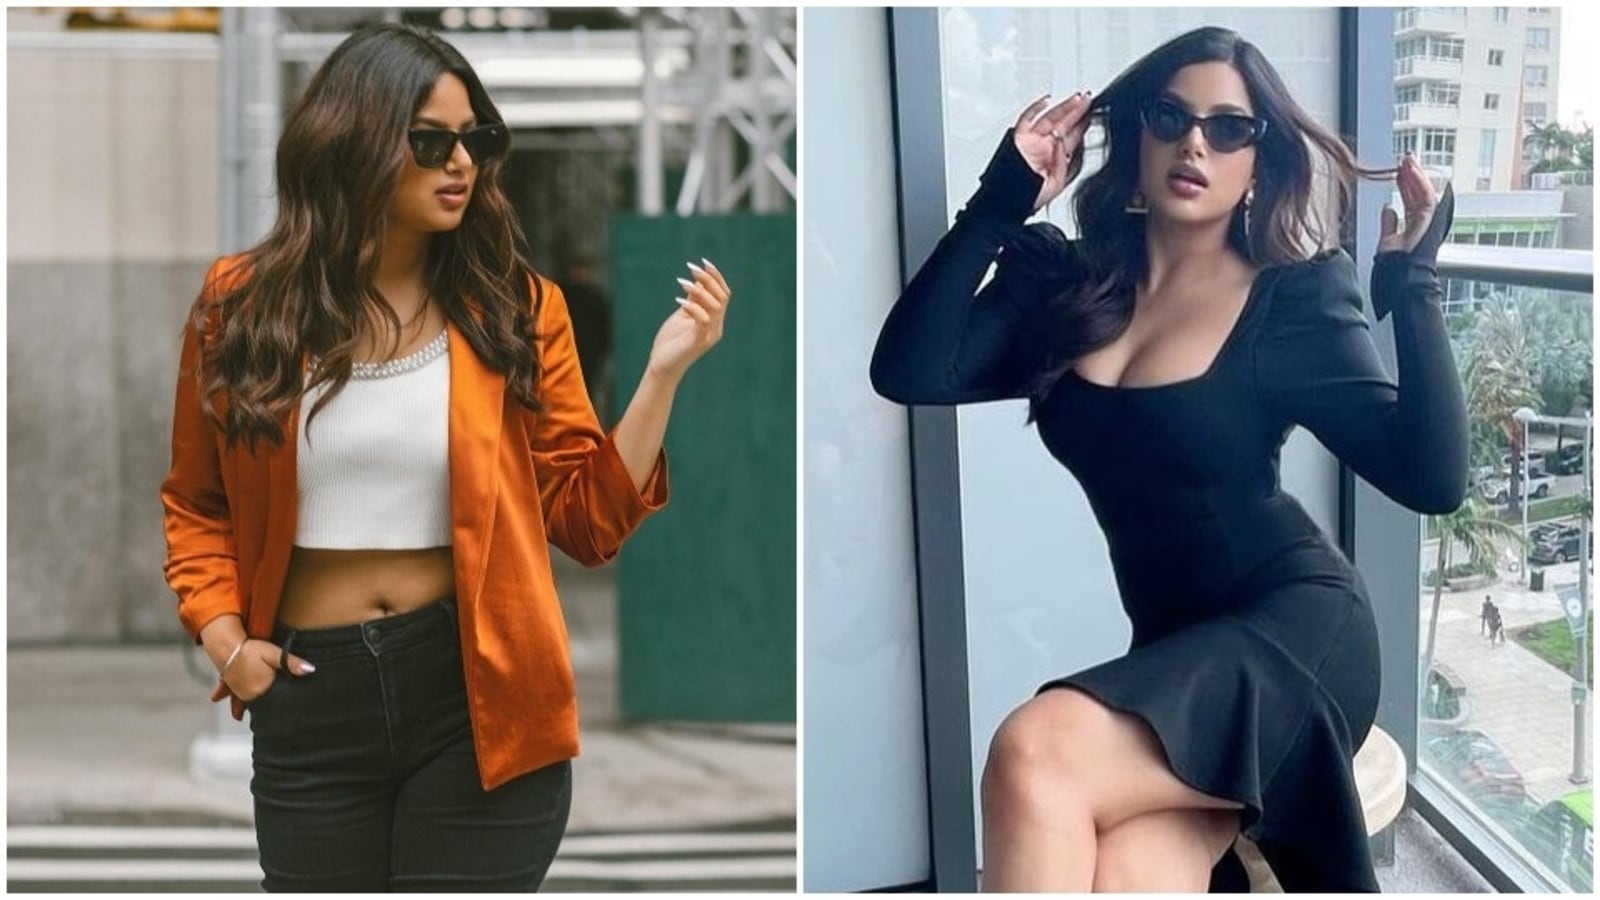 harnaaz-sandhu-in-two-classy-looks-turns-up-the-hotness-quotient-for-her-latest-photoshoot-see-pics-here